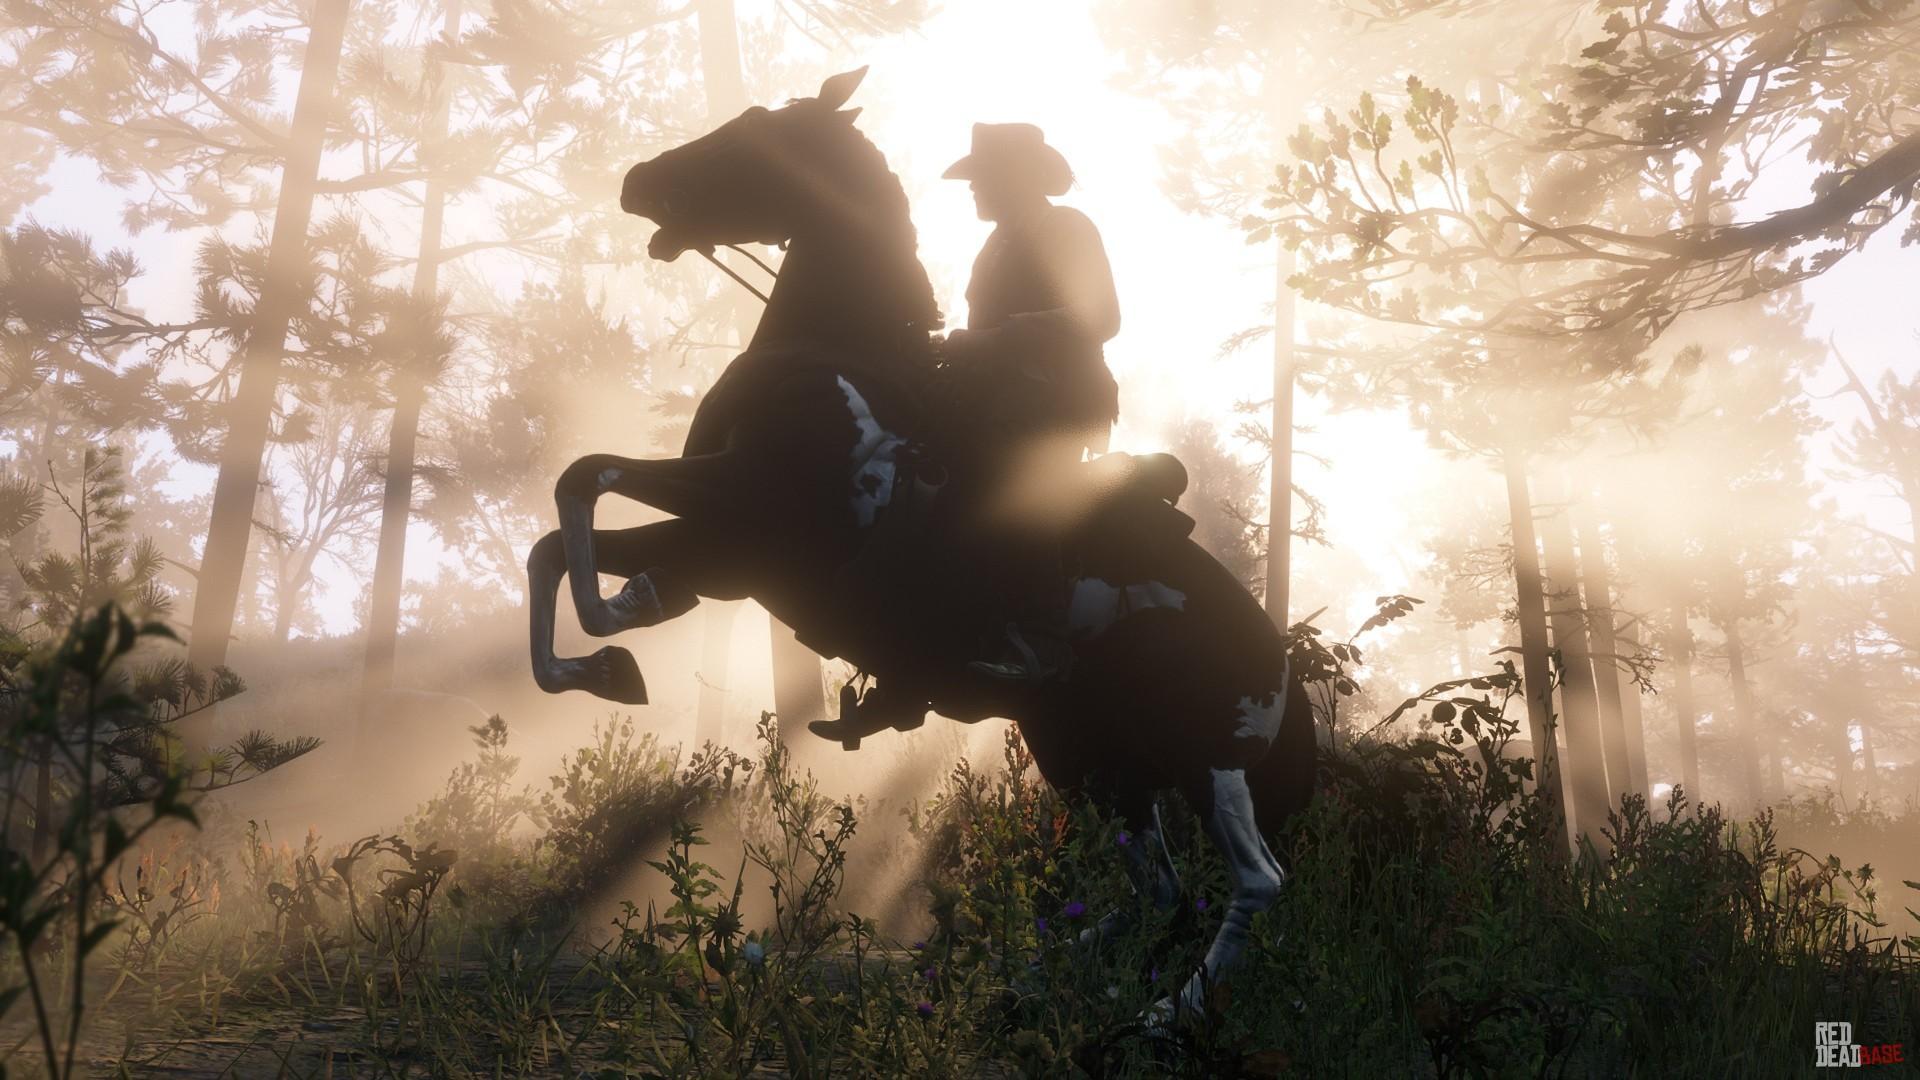 Red Dead Redemption 2 has sold over 50 million units lifetime